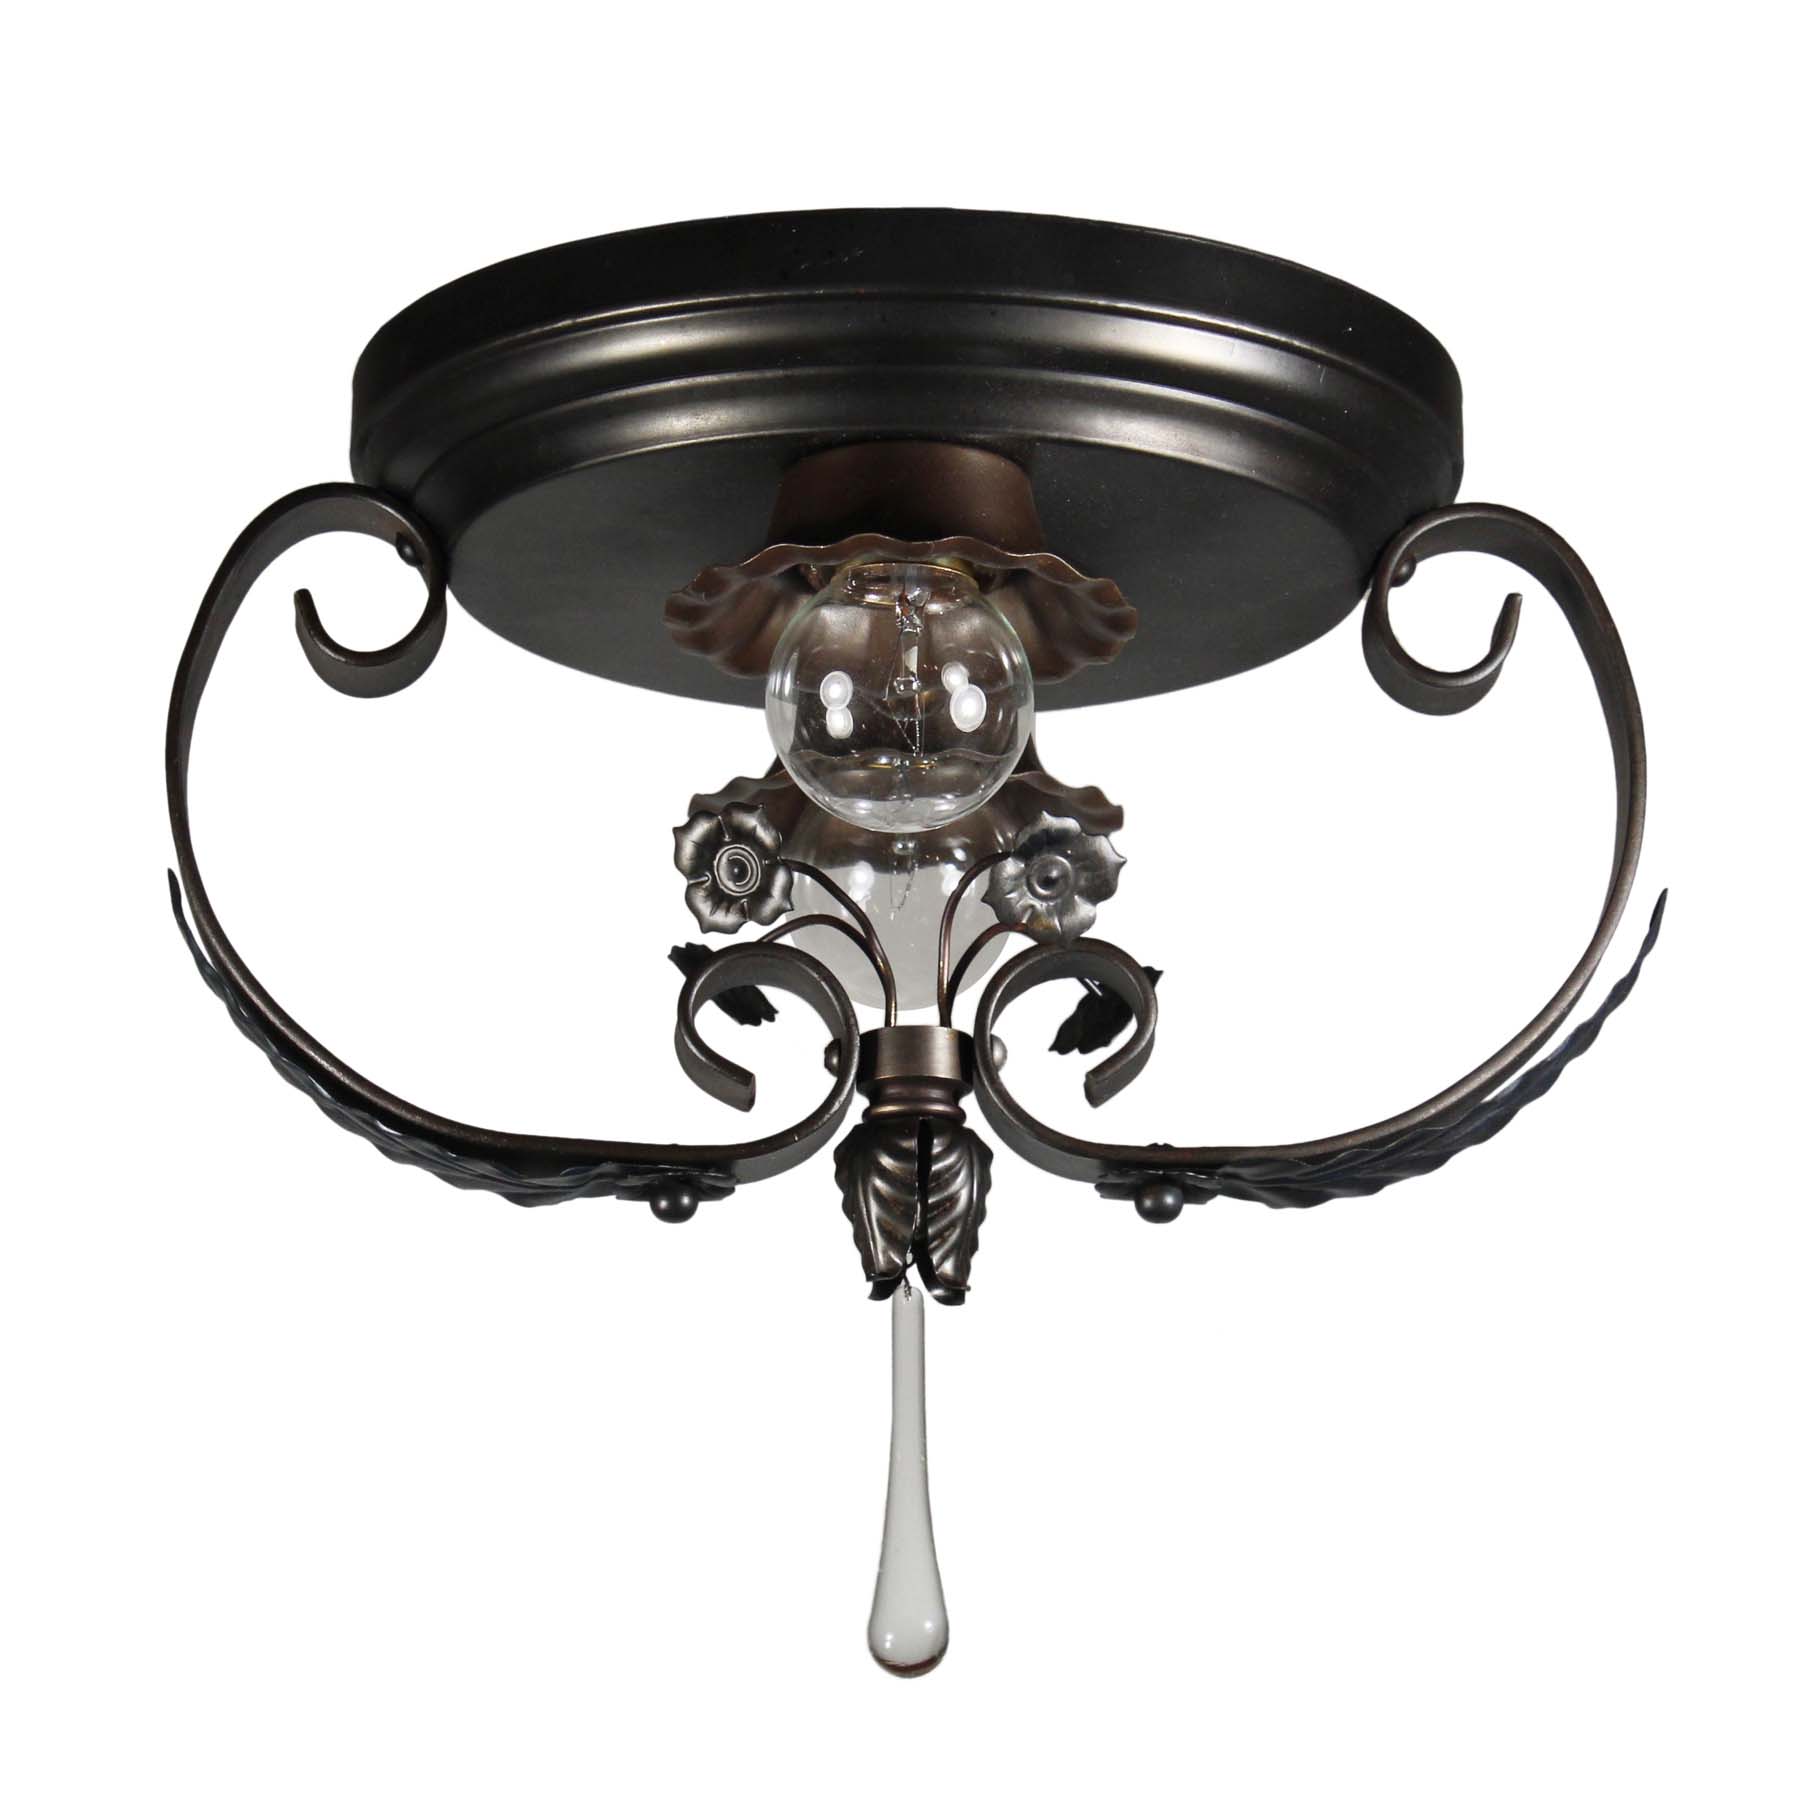 SOLD Antique Two-Light Flush Mount Fixtures, Early 1900’s-69493